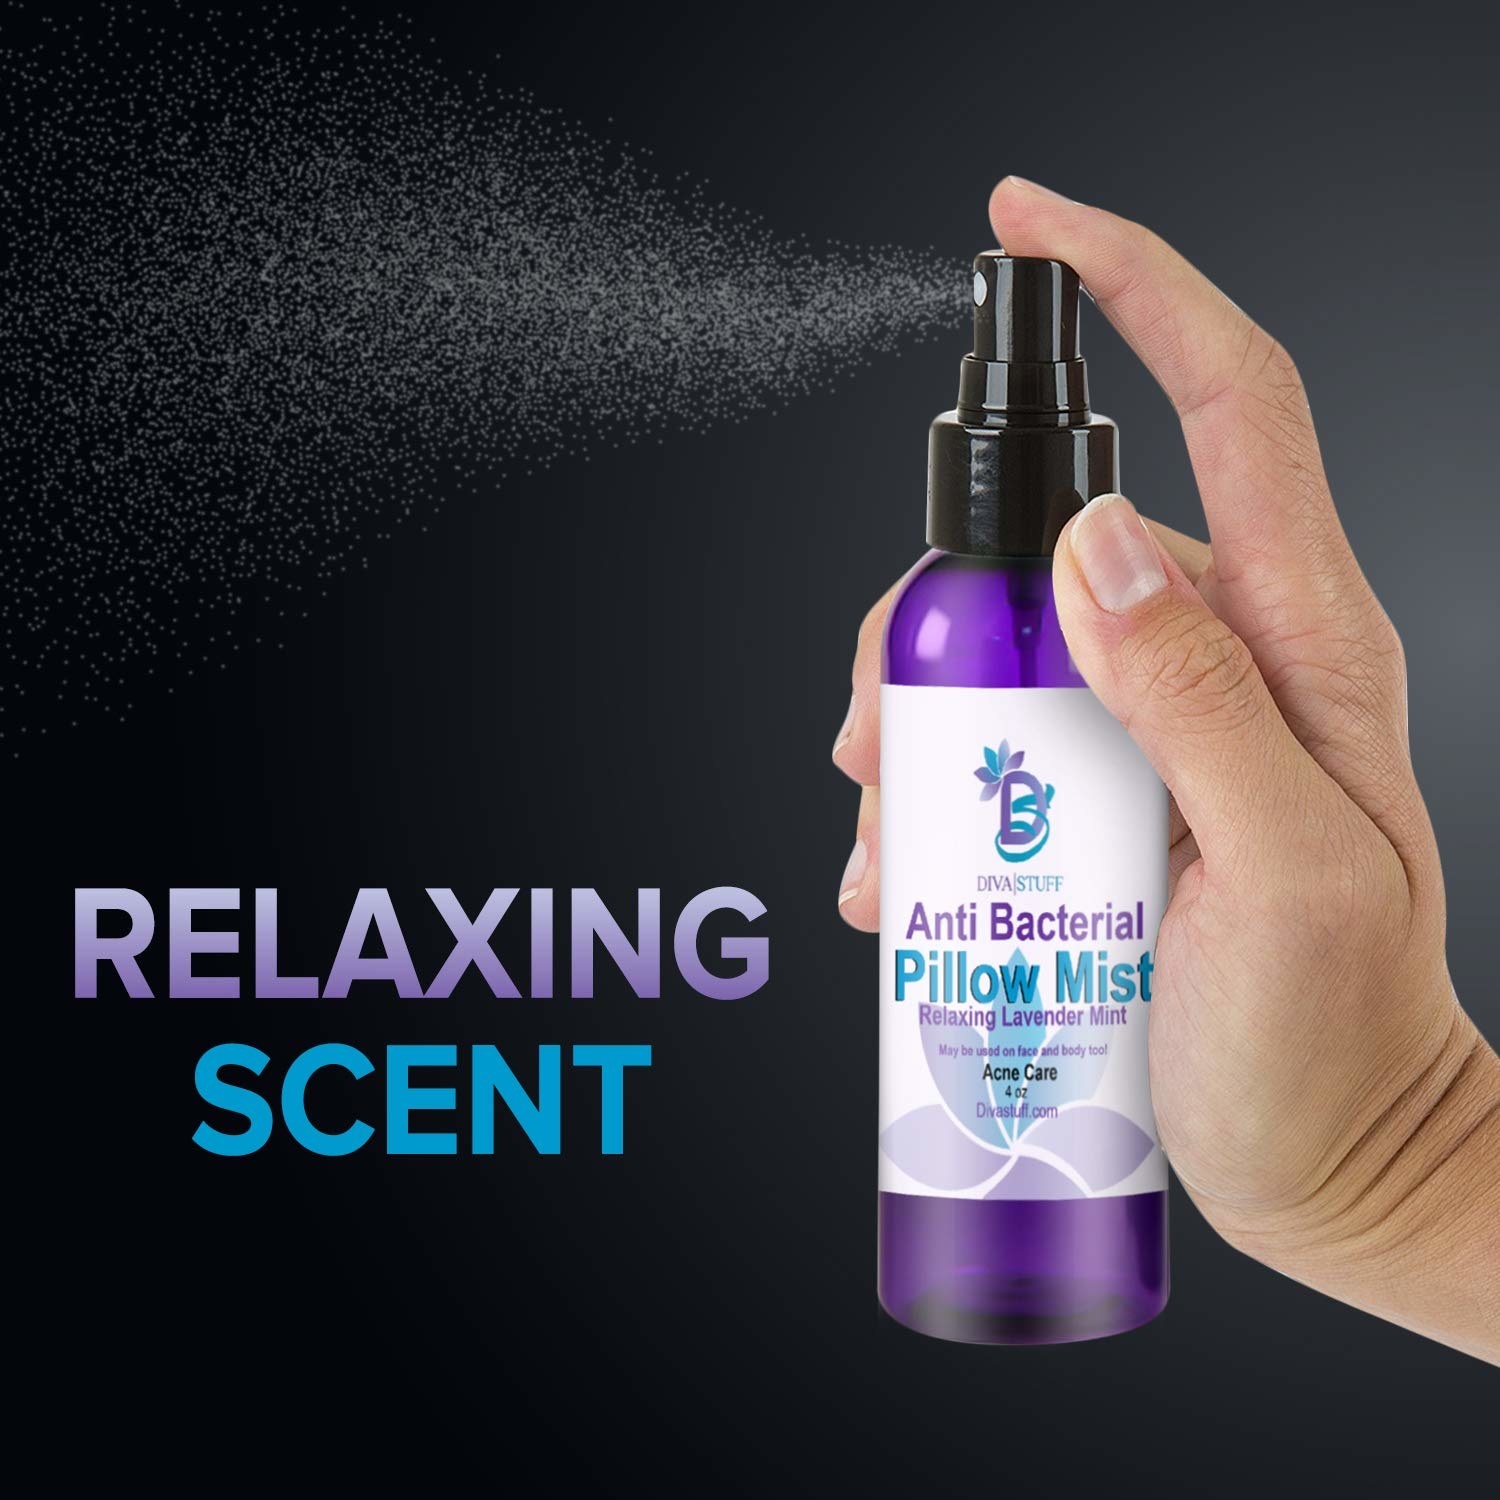 The spray bottle, with text touting its relaxing scent